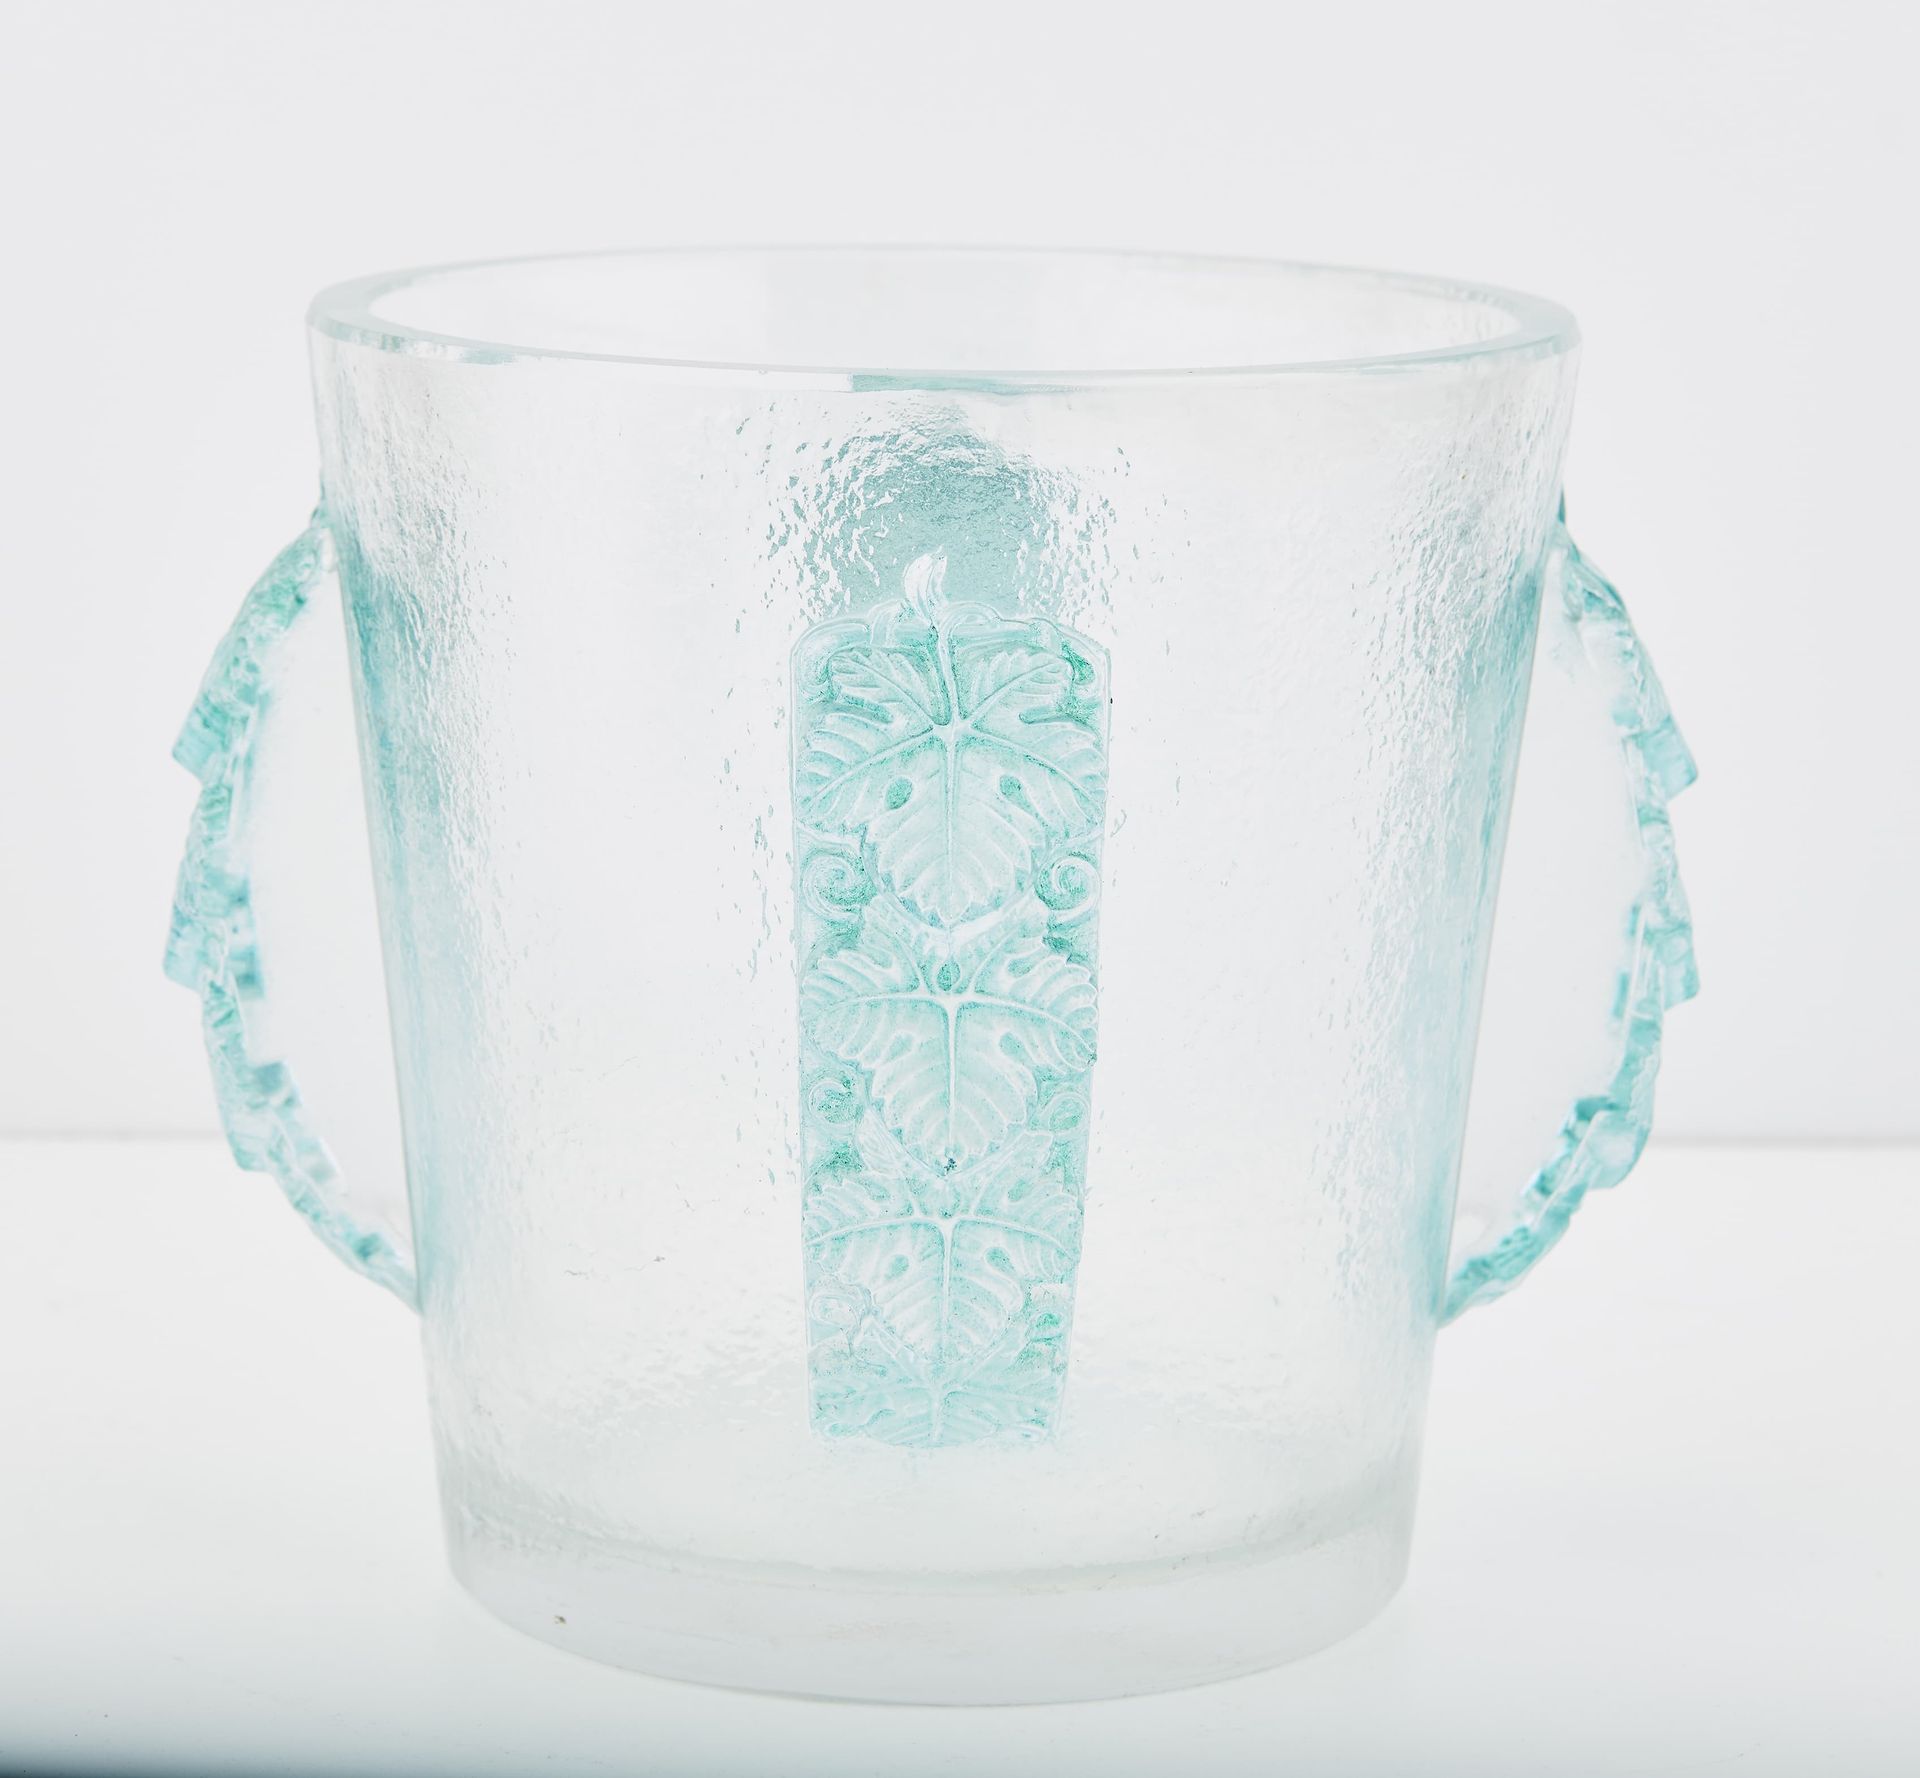 Null R. LALIQUE 1860-1945
Champagne bucket
in blue-green patinated granite glass&hellip;